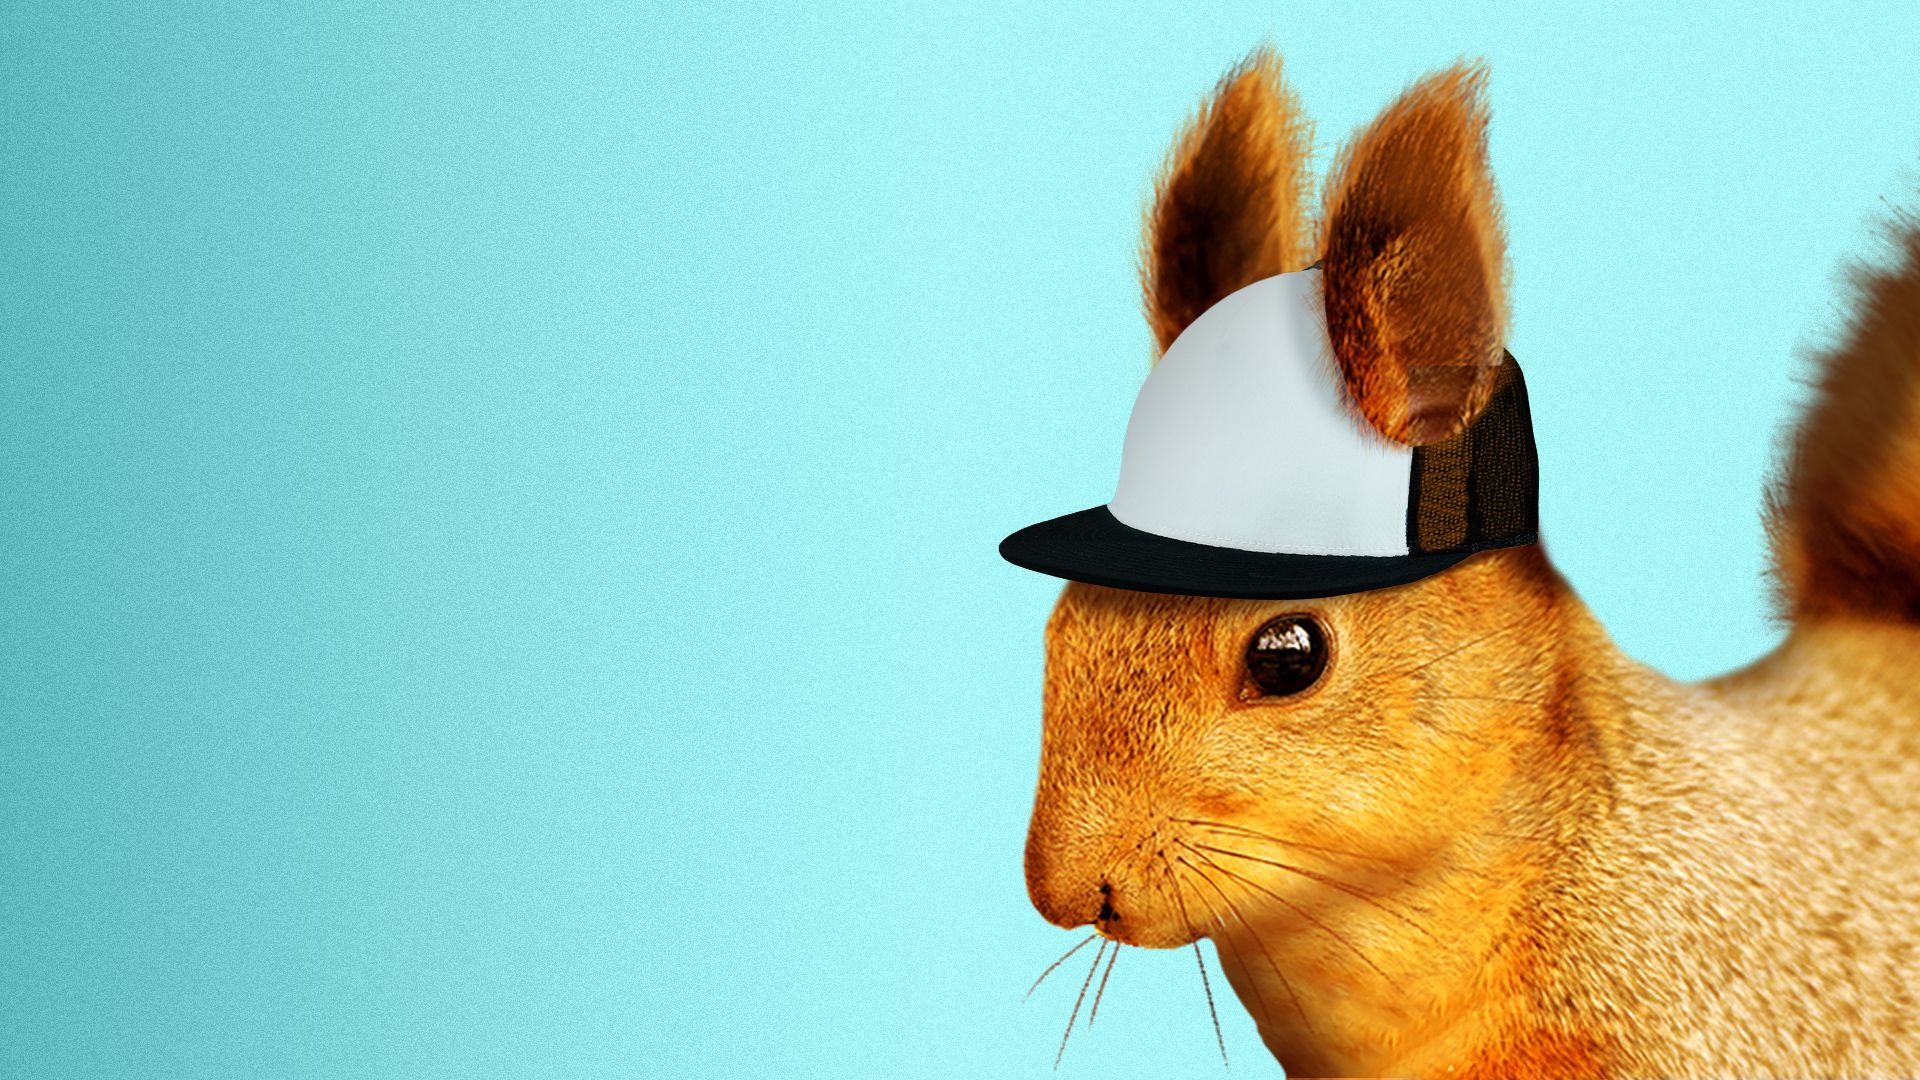 Illustration of a squirrel wearing a baseball cap.  